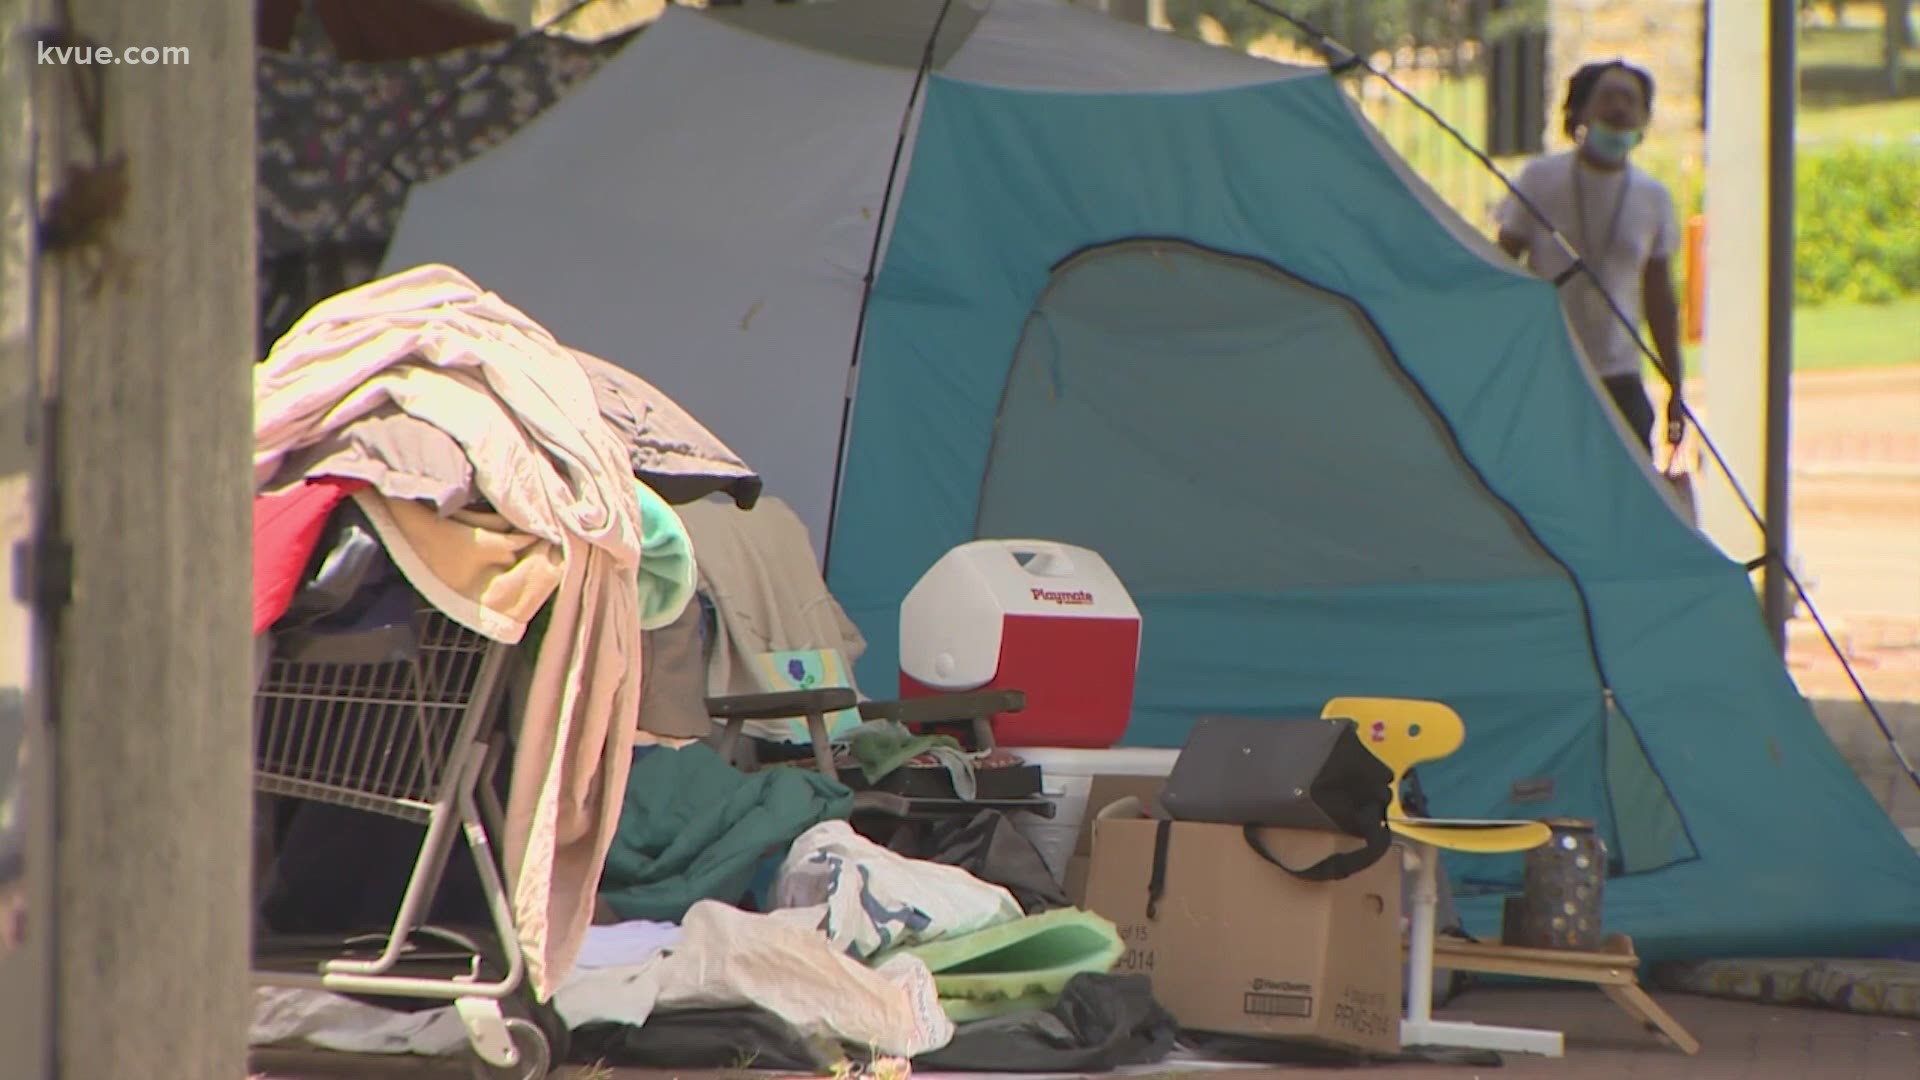 The Austin City Council approved buying another hotel to house the homeless.